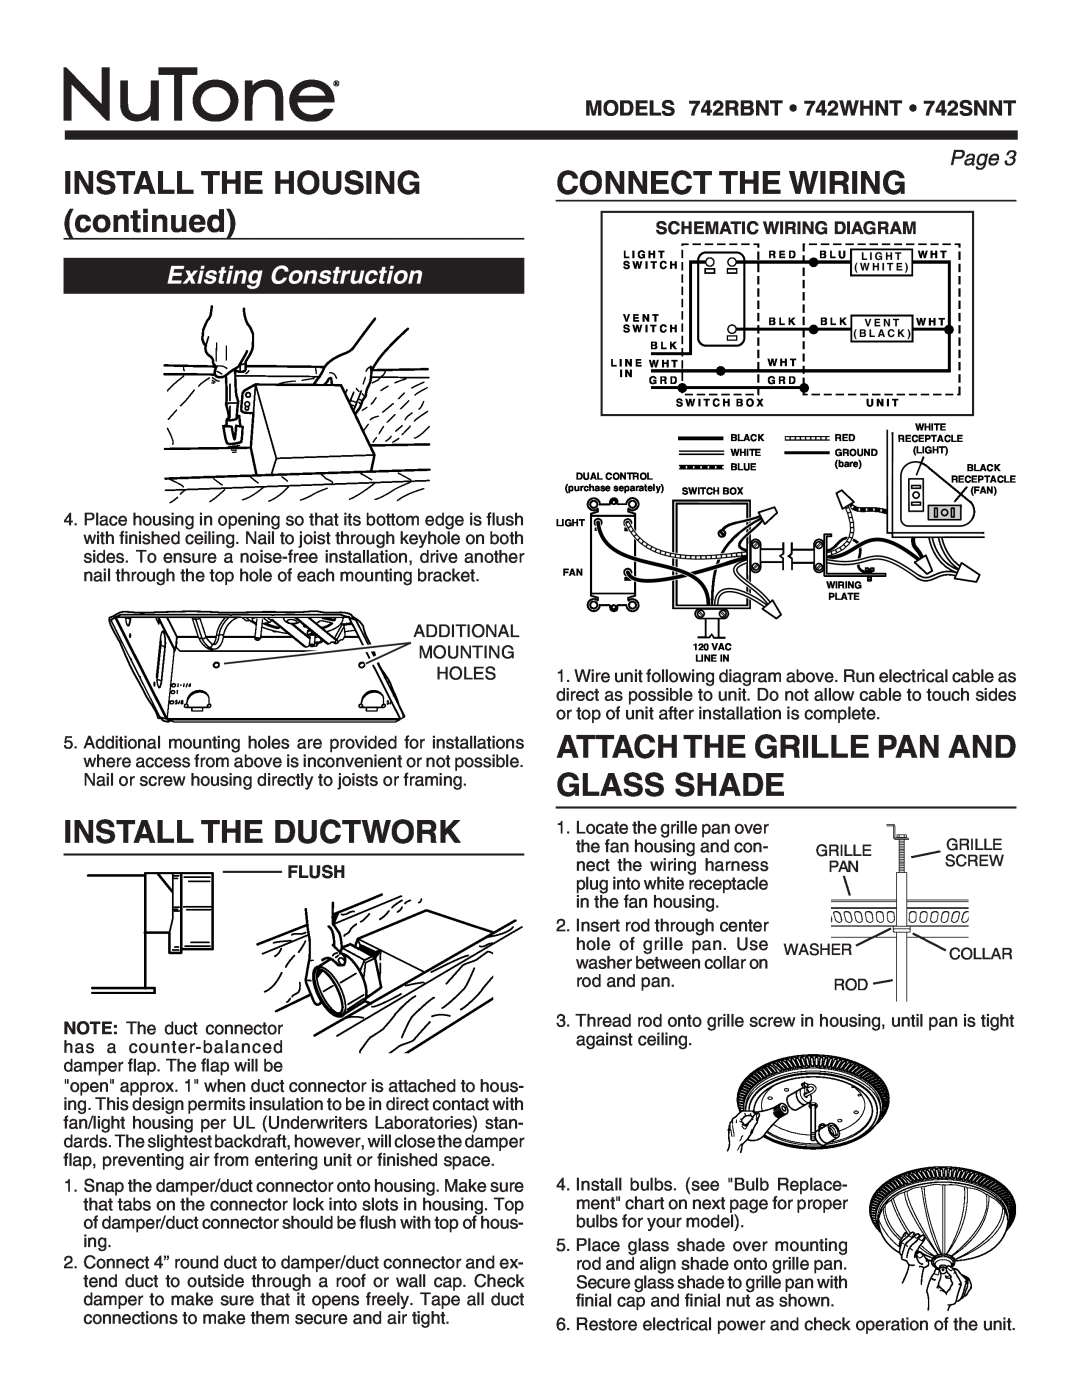 NuTone 742SNNT Connect The Wiring, Attach The Grille Pan And Glass Shade, Install The Ductwork, Schematic Wiring Diagram 